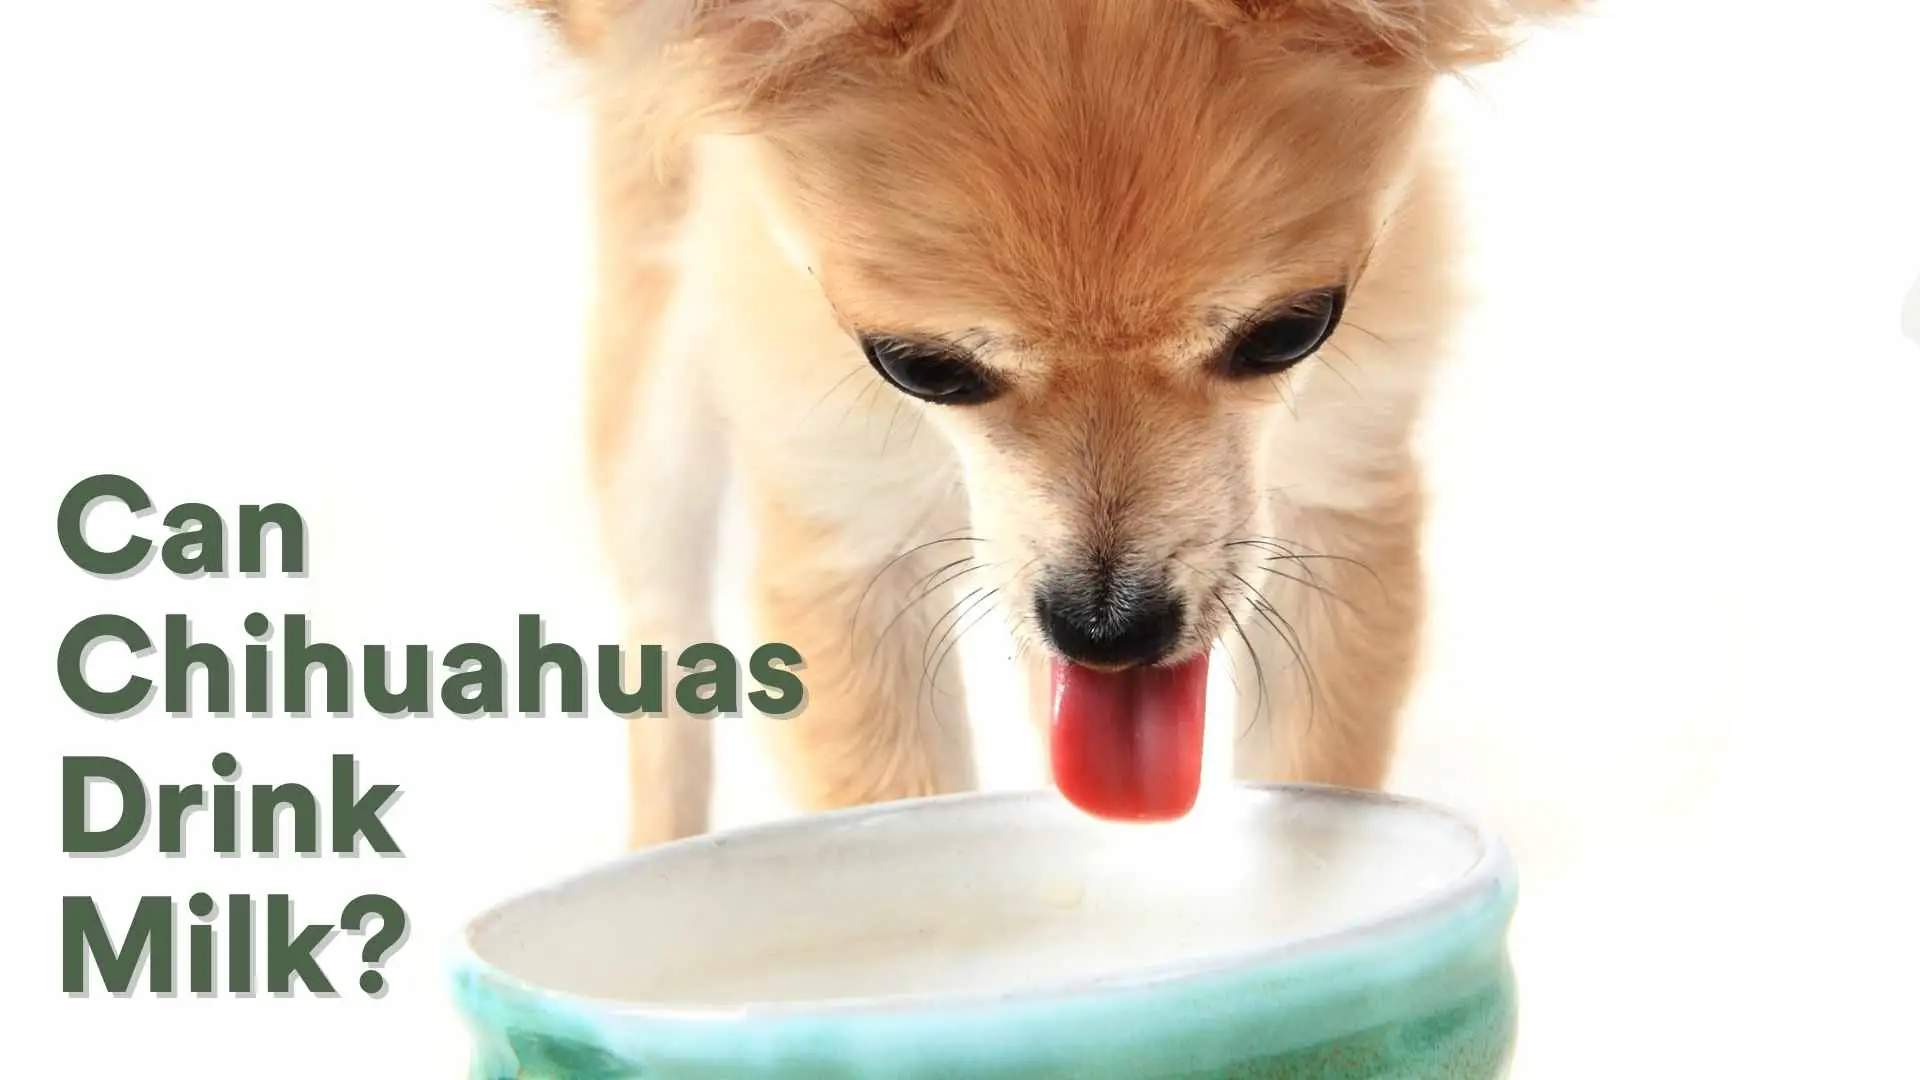 Can Chihuahuas Drink Milk?